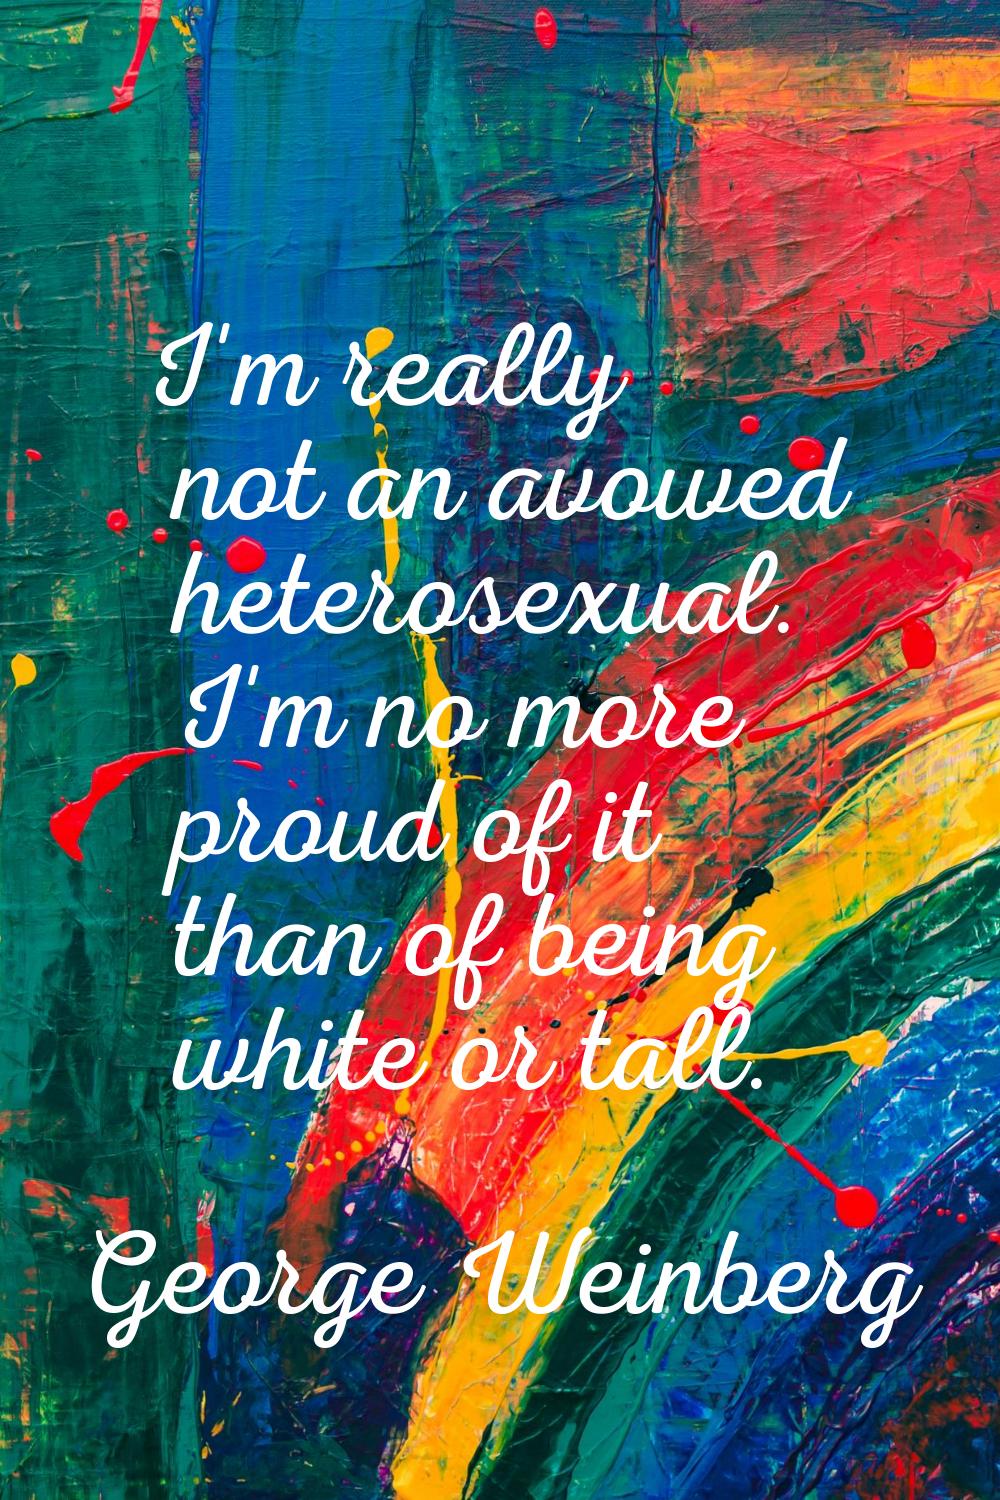 I'm really not an avowed heterosexual. I'm no more proud of it than of being white or tall.